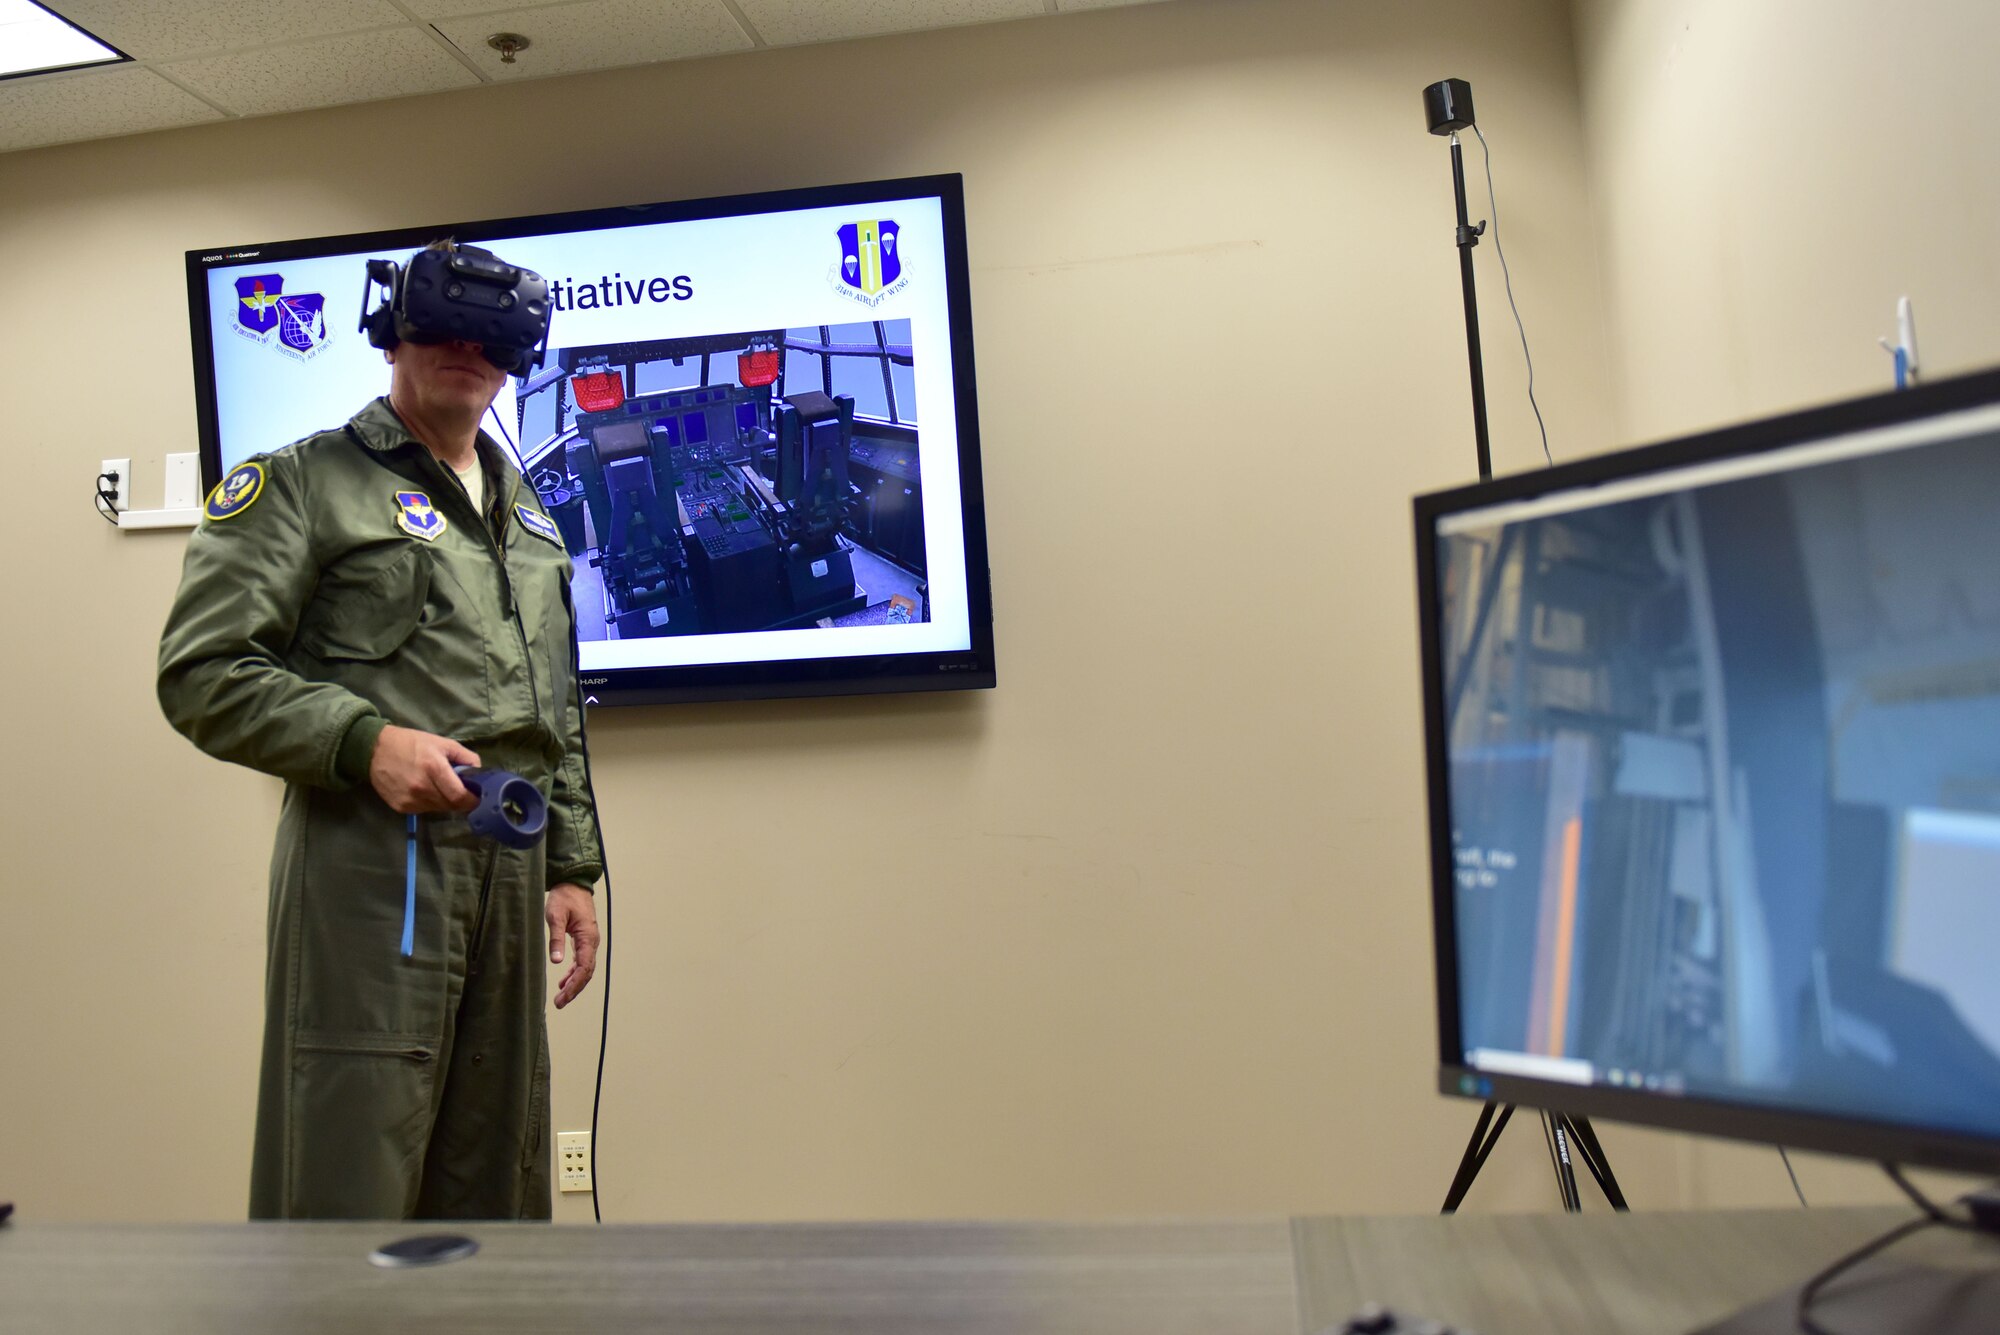 A man wearing the Air Force flight suit uses virtual reality training devices.